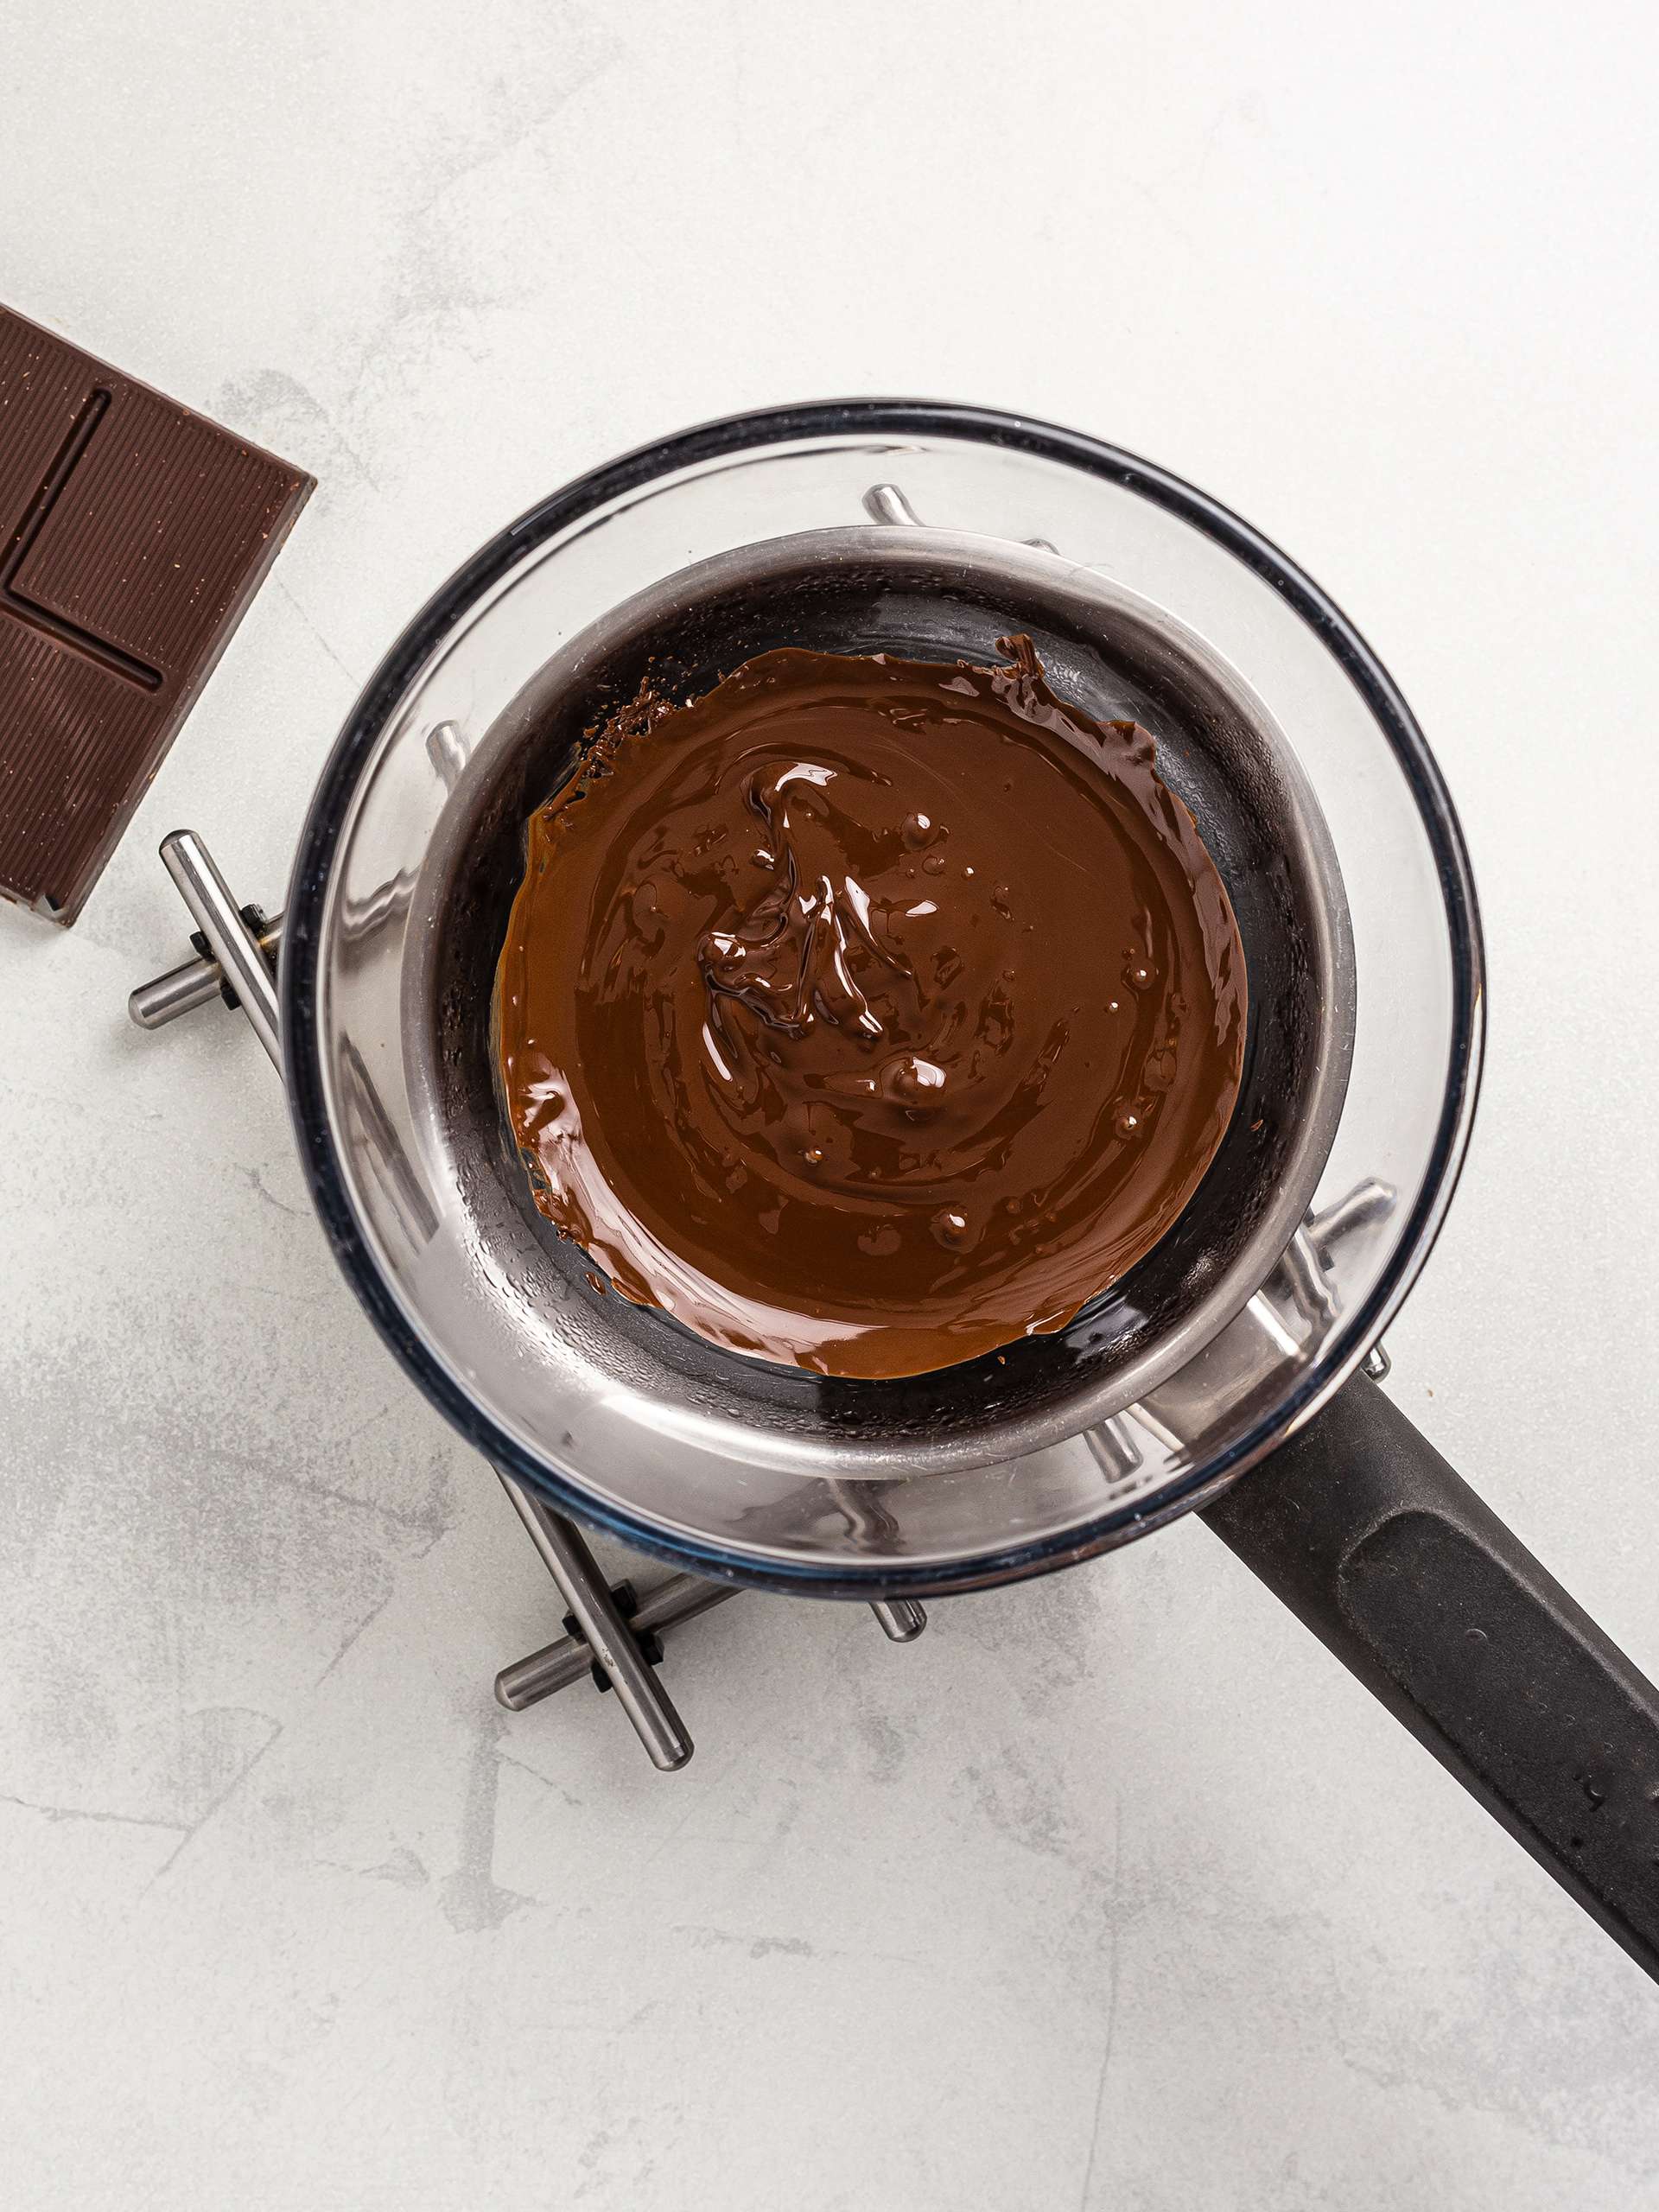 dark chocolate melted over a double boiler